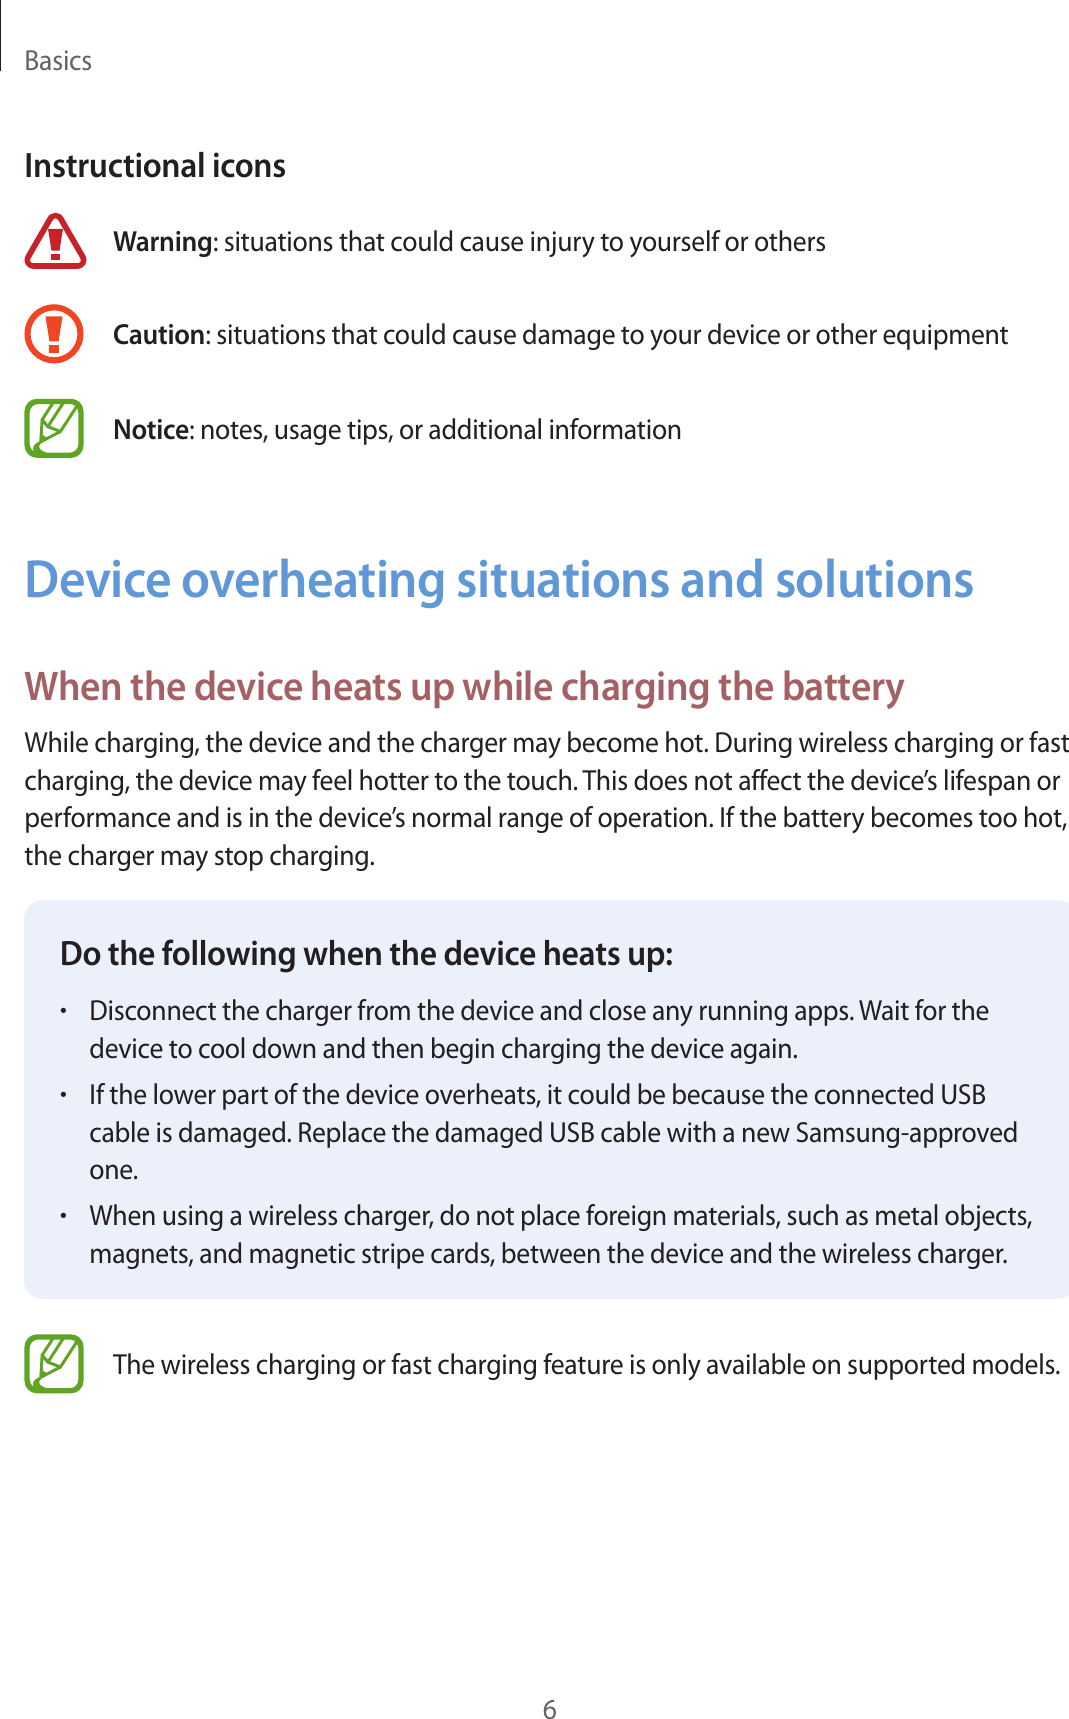 Basics6Instructional iconsWarning: situations that could cause injury to yourself or othersCaution: situations that could cause damage to your device or other equipmentNotice: notes, usage tips, or additional informationDevice overheating situations and solutionsWhen the device heats up while charging the batteryWhile charging, the device and the charger may become hot. During wireless charging or fast charging, the device may feel hotter to the touch. This does not affect the device’s lifespan or performance and is in the device’s normal range of operation. If the battery becomes too hot, the charger may stop charging.Do the following when the device heats up:•Disconnect the charger from the device and close any running apps. Wait for the device to cool down and then begin charging the device again.•If the lower part of the device overheats, it could be because the connected USB cable is damaged. Replace the damaged USB cable with a new Samsung-approved one.•When using a wireless charger, do not place foreign materials, such as metal objects, magnets, and magnetic stripe cards, between the device and the wireless charger.The wireless charging or fast charging feature is only available on supported models.